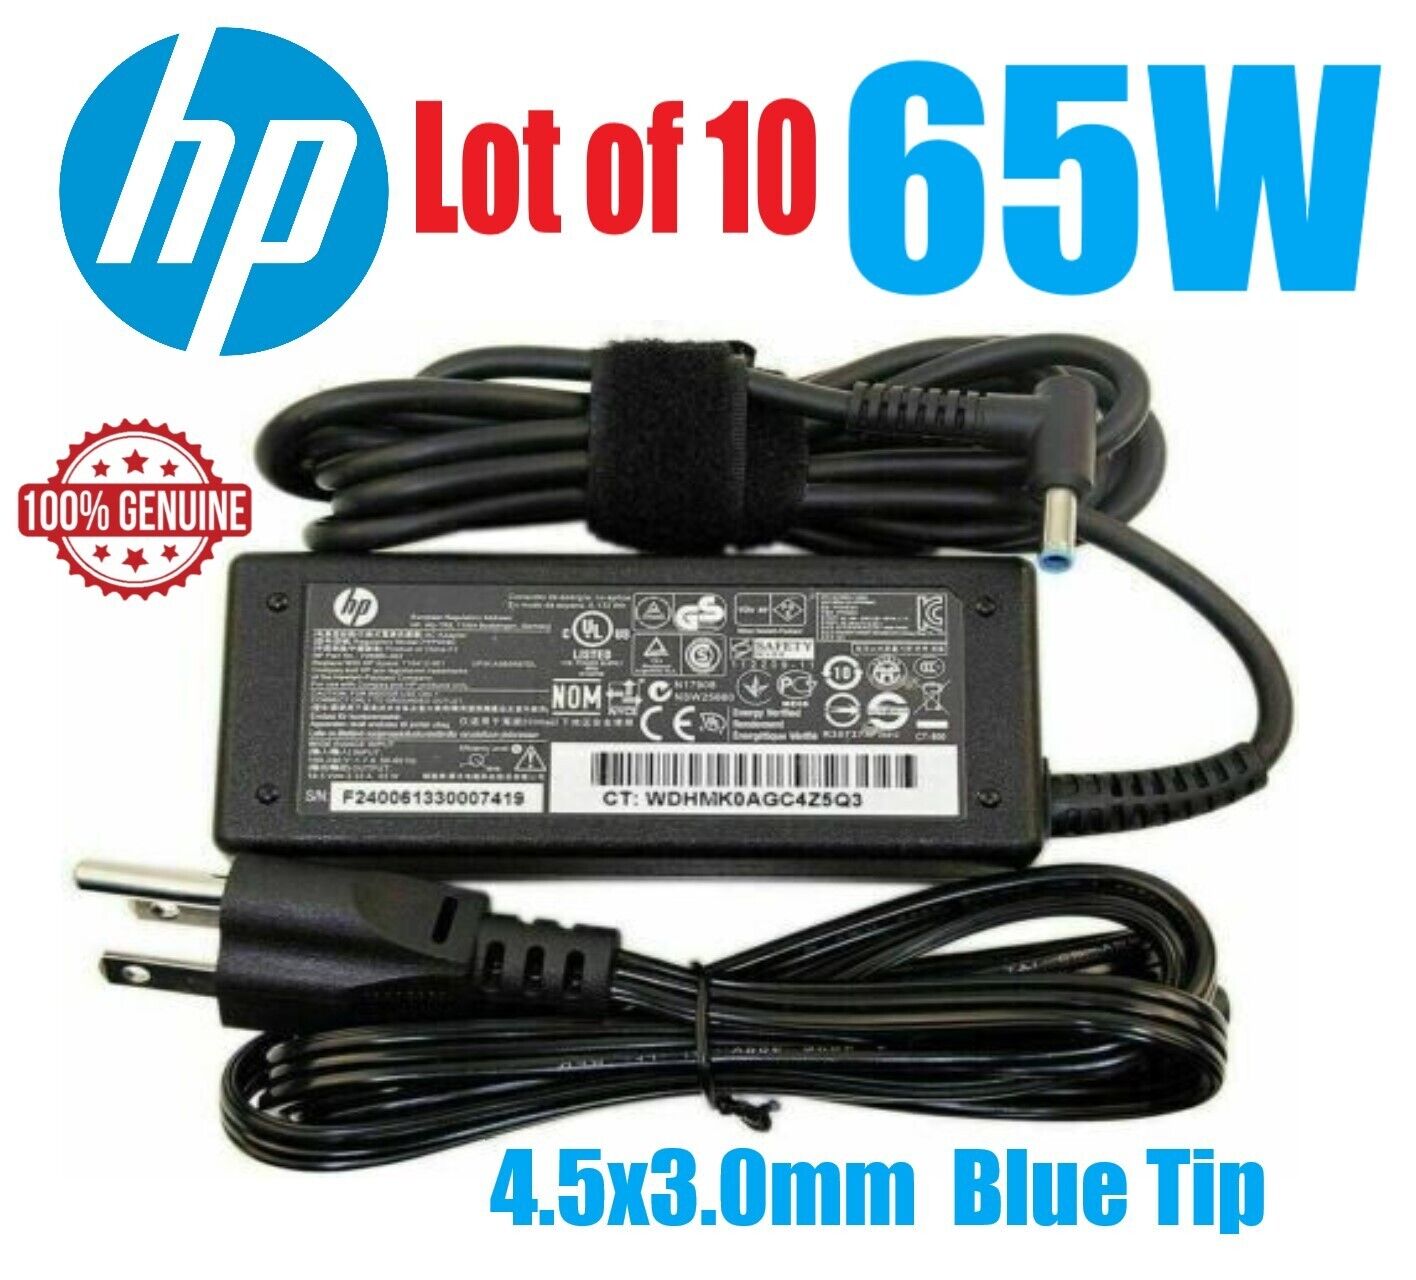 LOT OF 10 Genuine HP 65W 19.5V 3.34A Laptop AC Adapter Power Charger Blue Tip